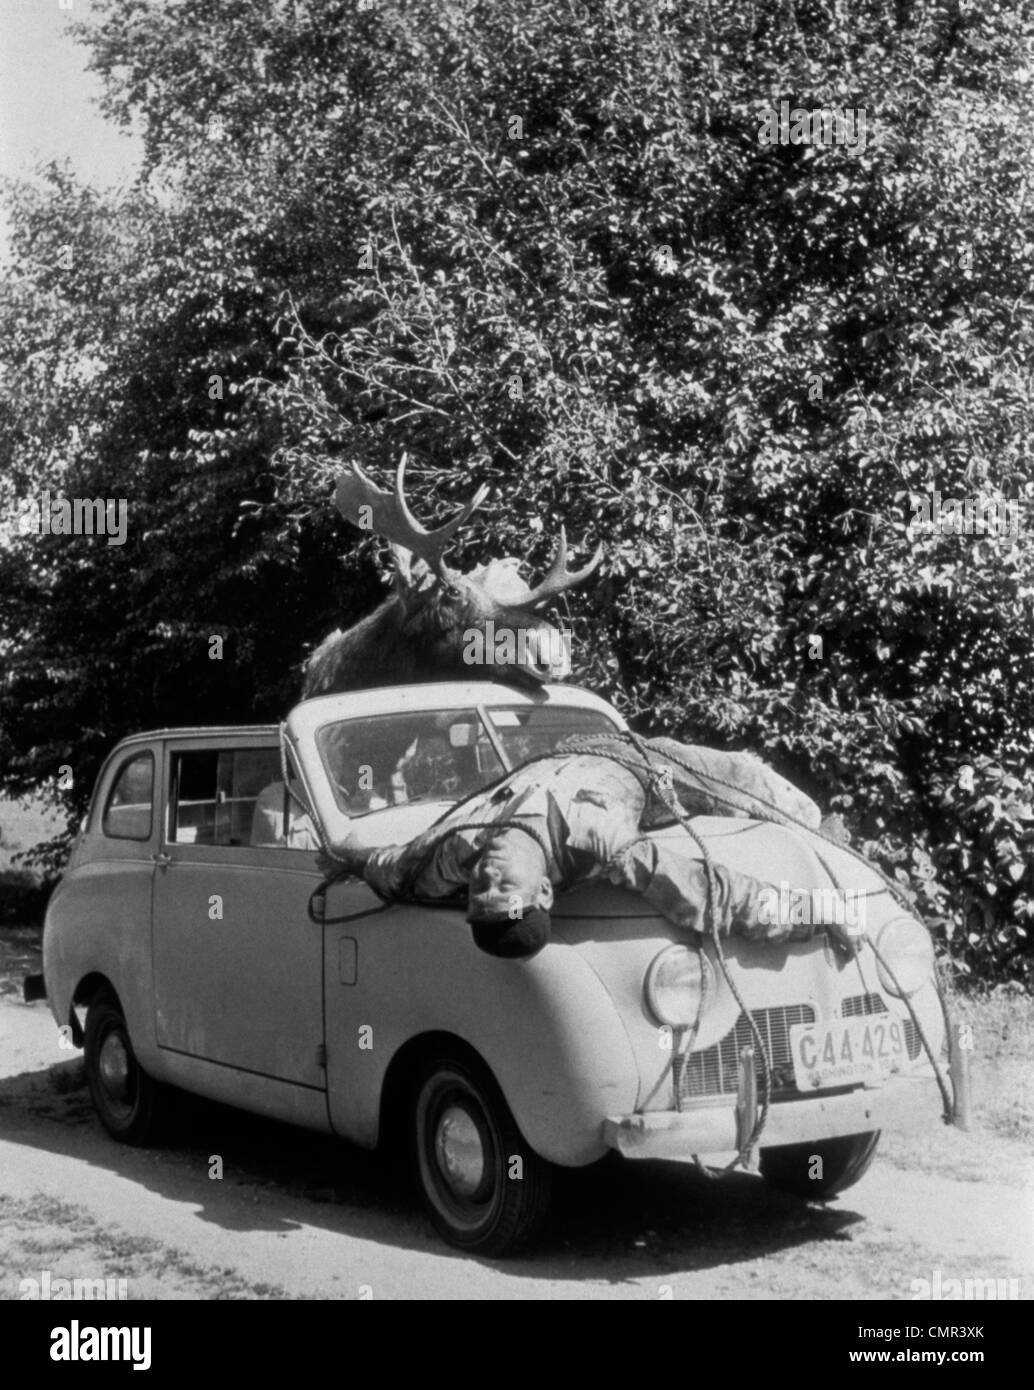 1940s 1950s MOOSE DRIVING CAR WITH MAN STRAPPED TIED TO THE HOOD Stock Photo